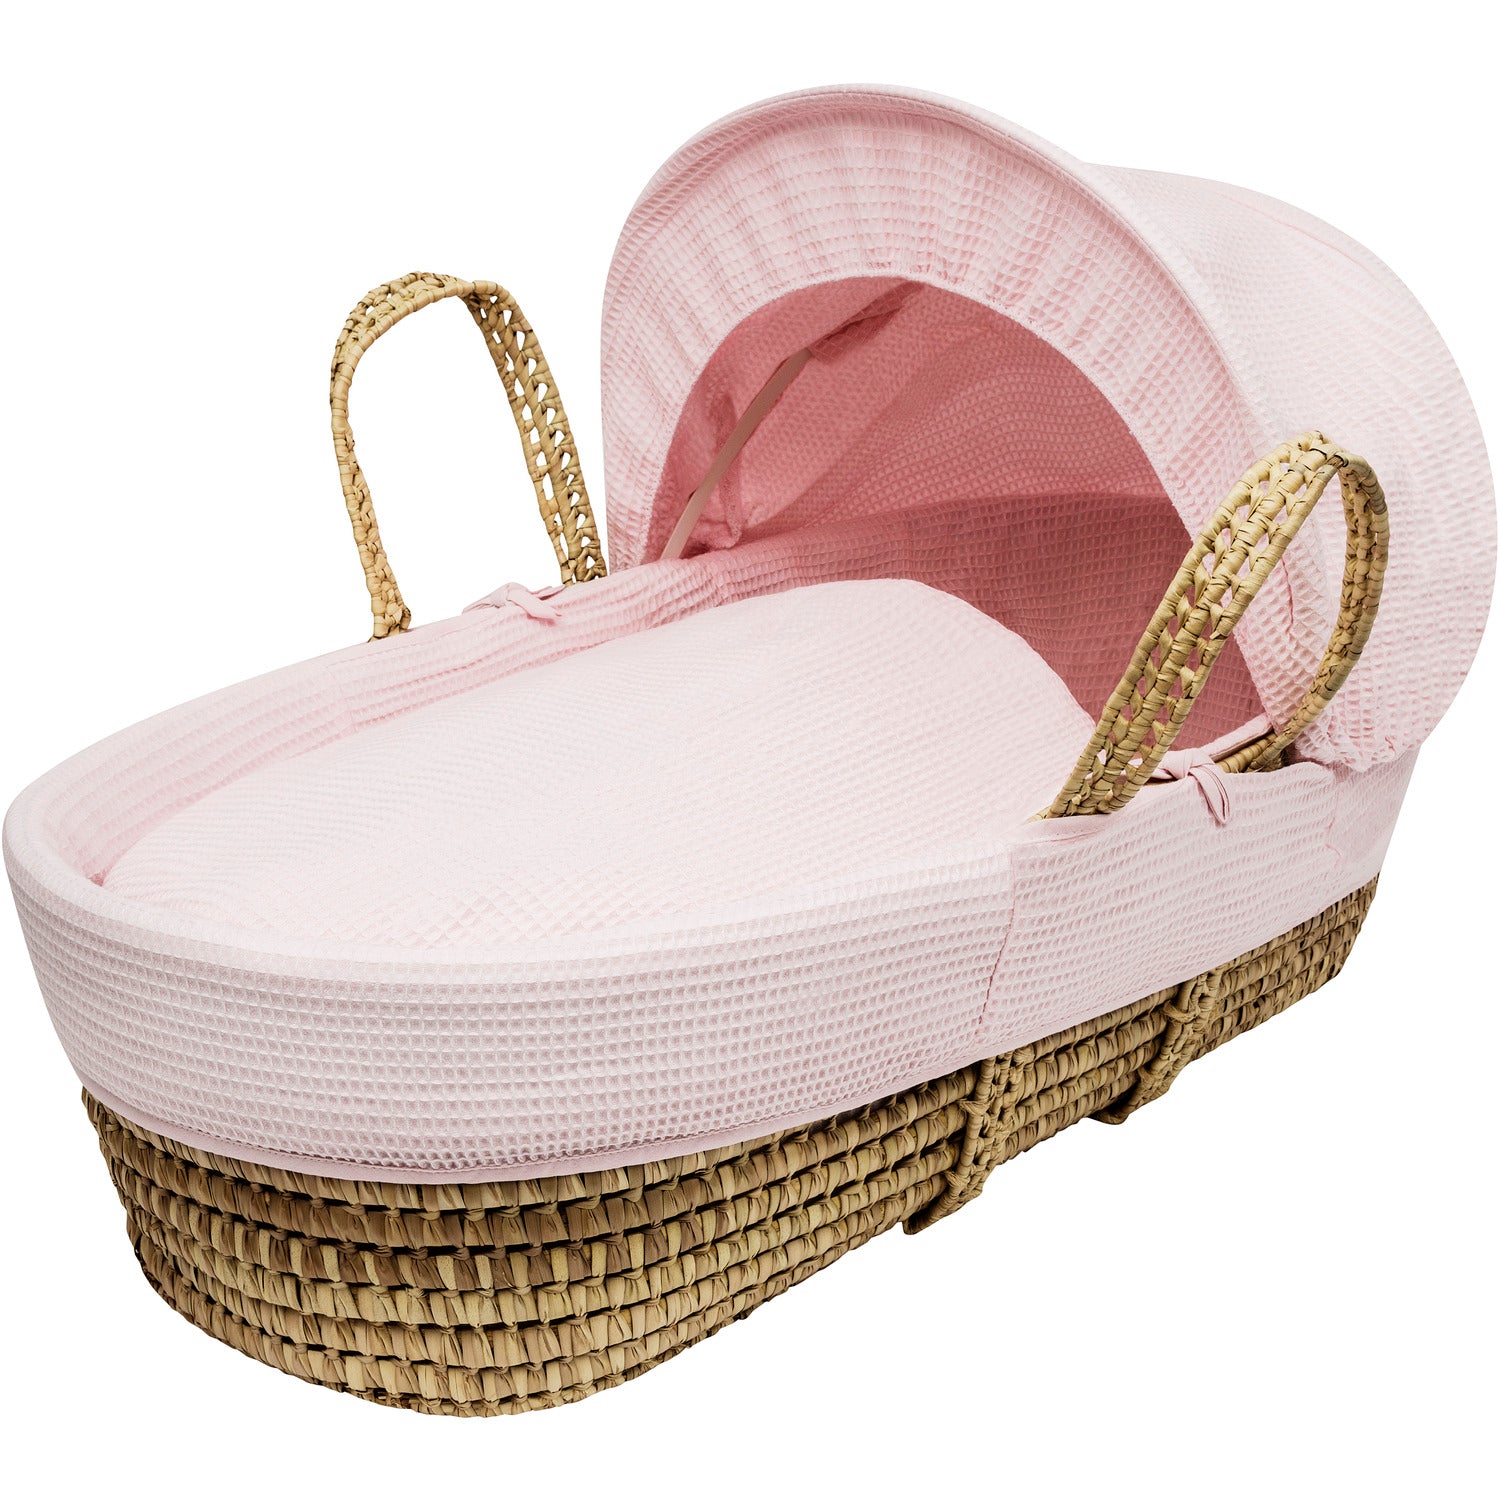 Moses Basket & Stand